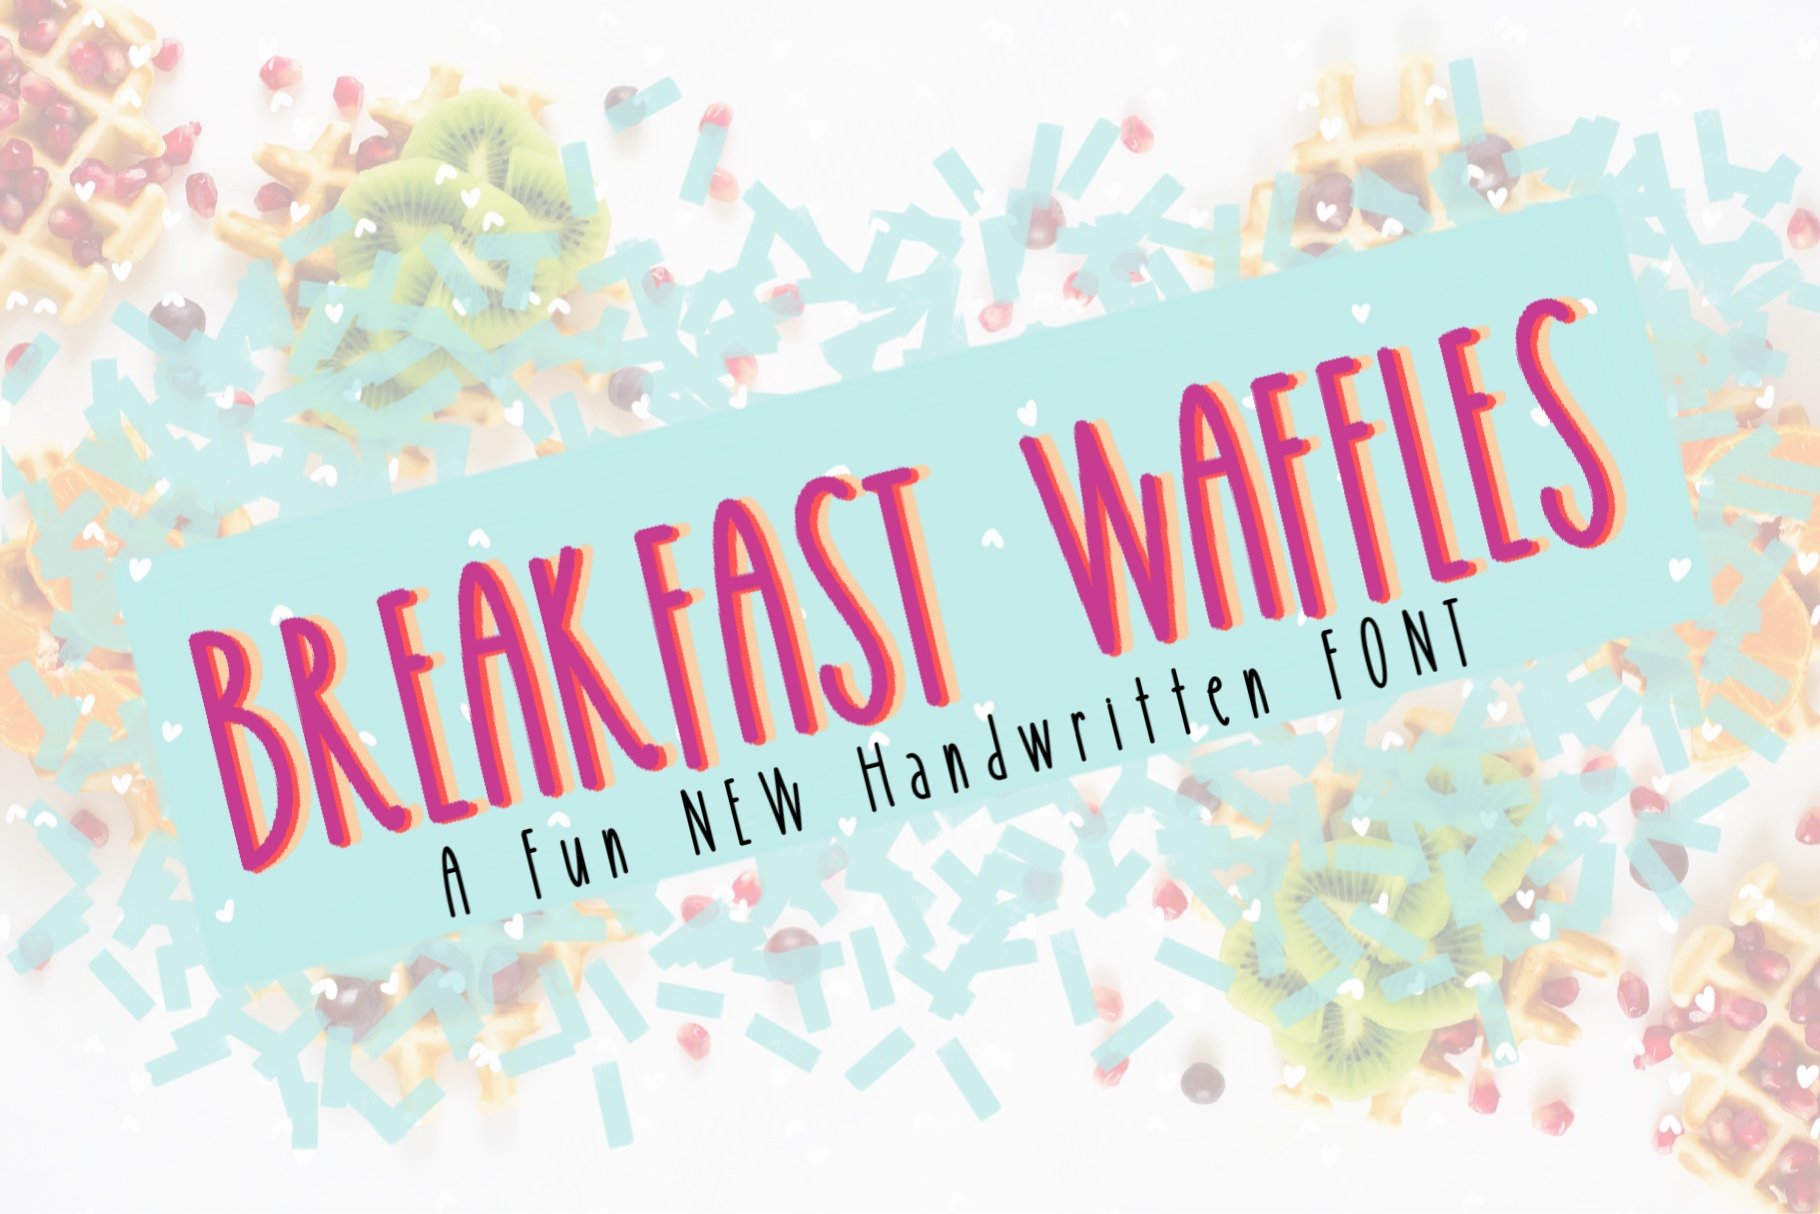 Breakfast Waffles Font cover image.